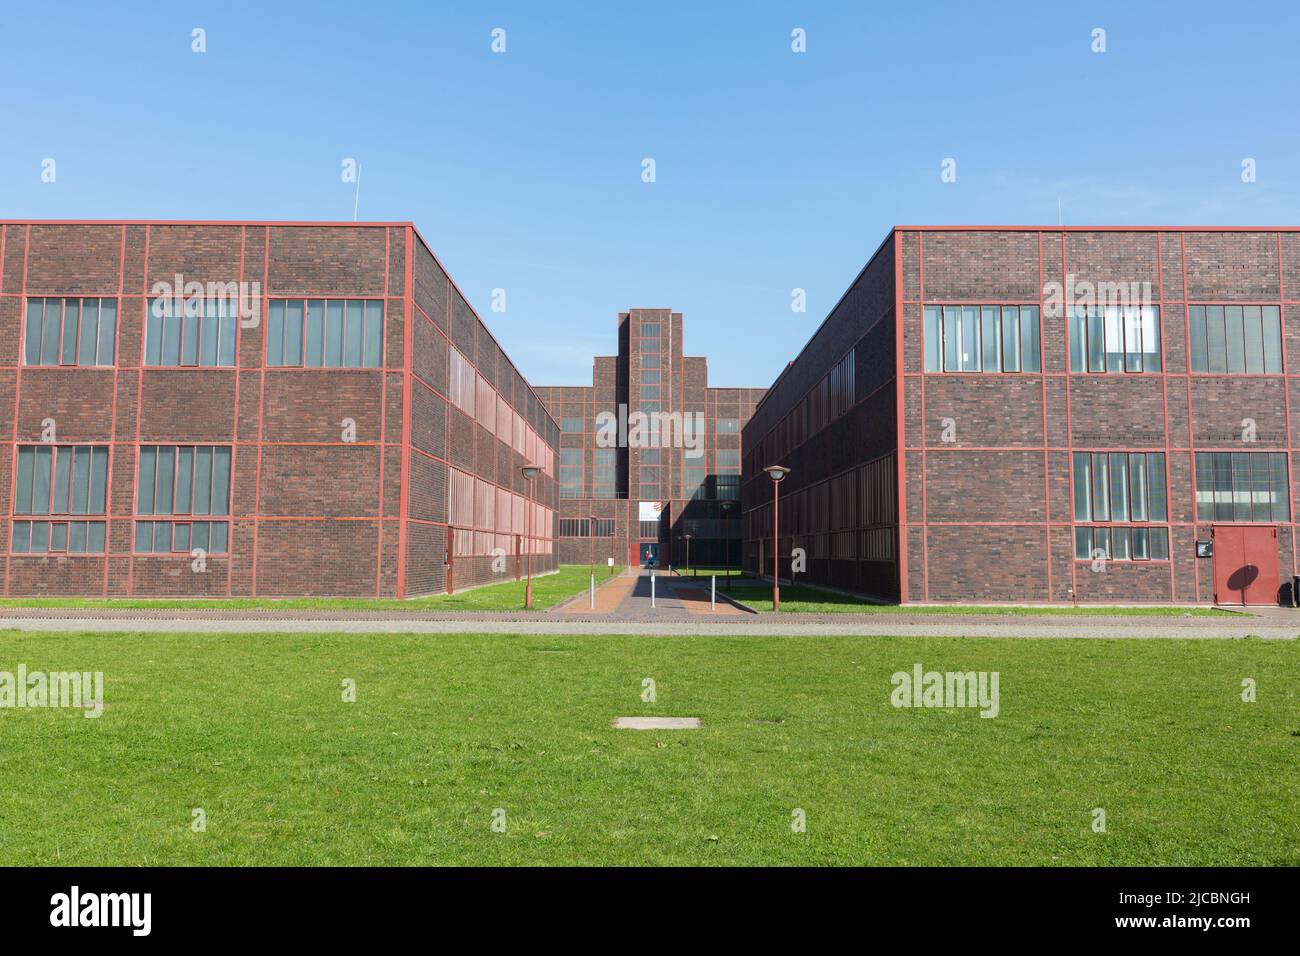 Essen, Germany - Mar 26, 2022: Brick buildings at Zeche Zollverein. The whole area is an UNESCO world heritage site. Stock Photo